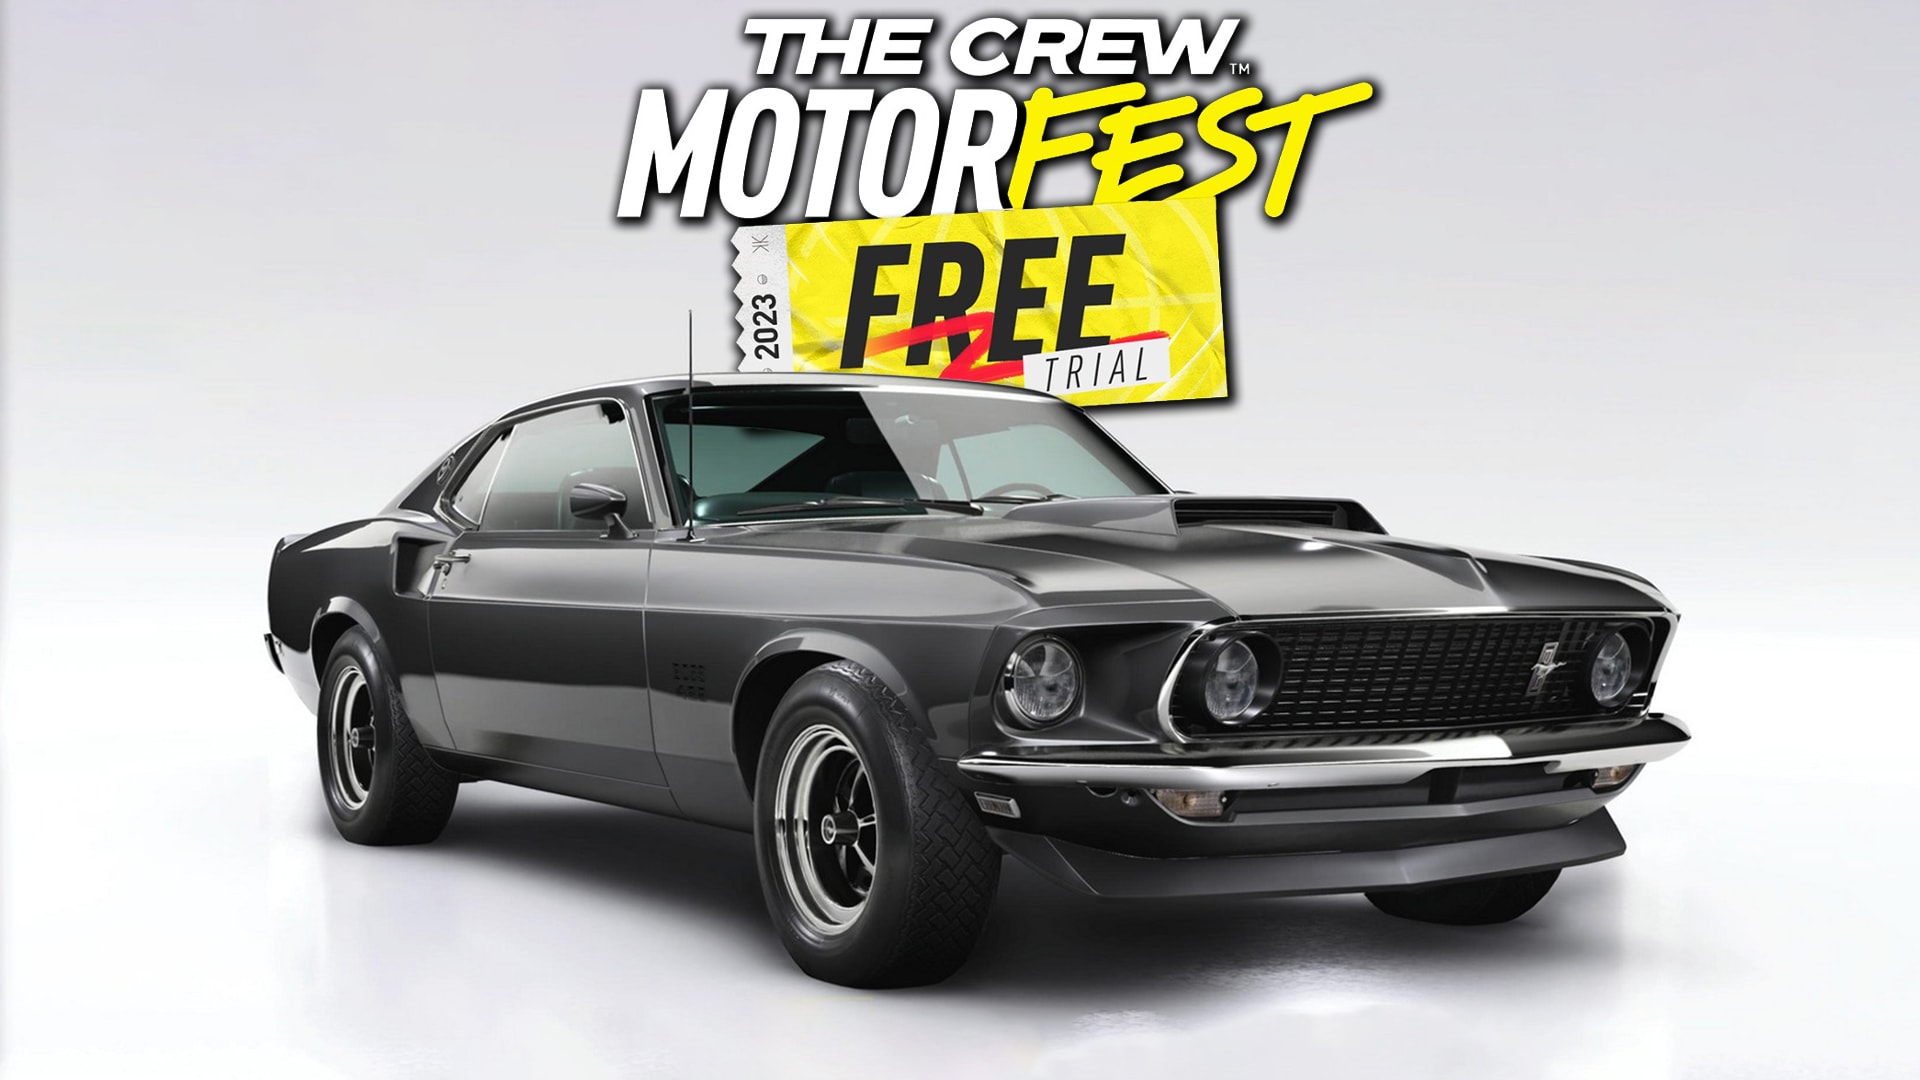 How To Get The Crew Motorfest For FREE NOW!! 